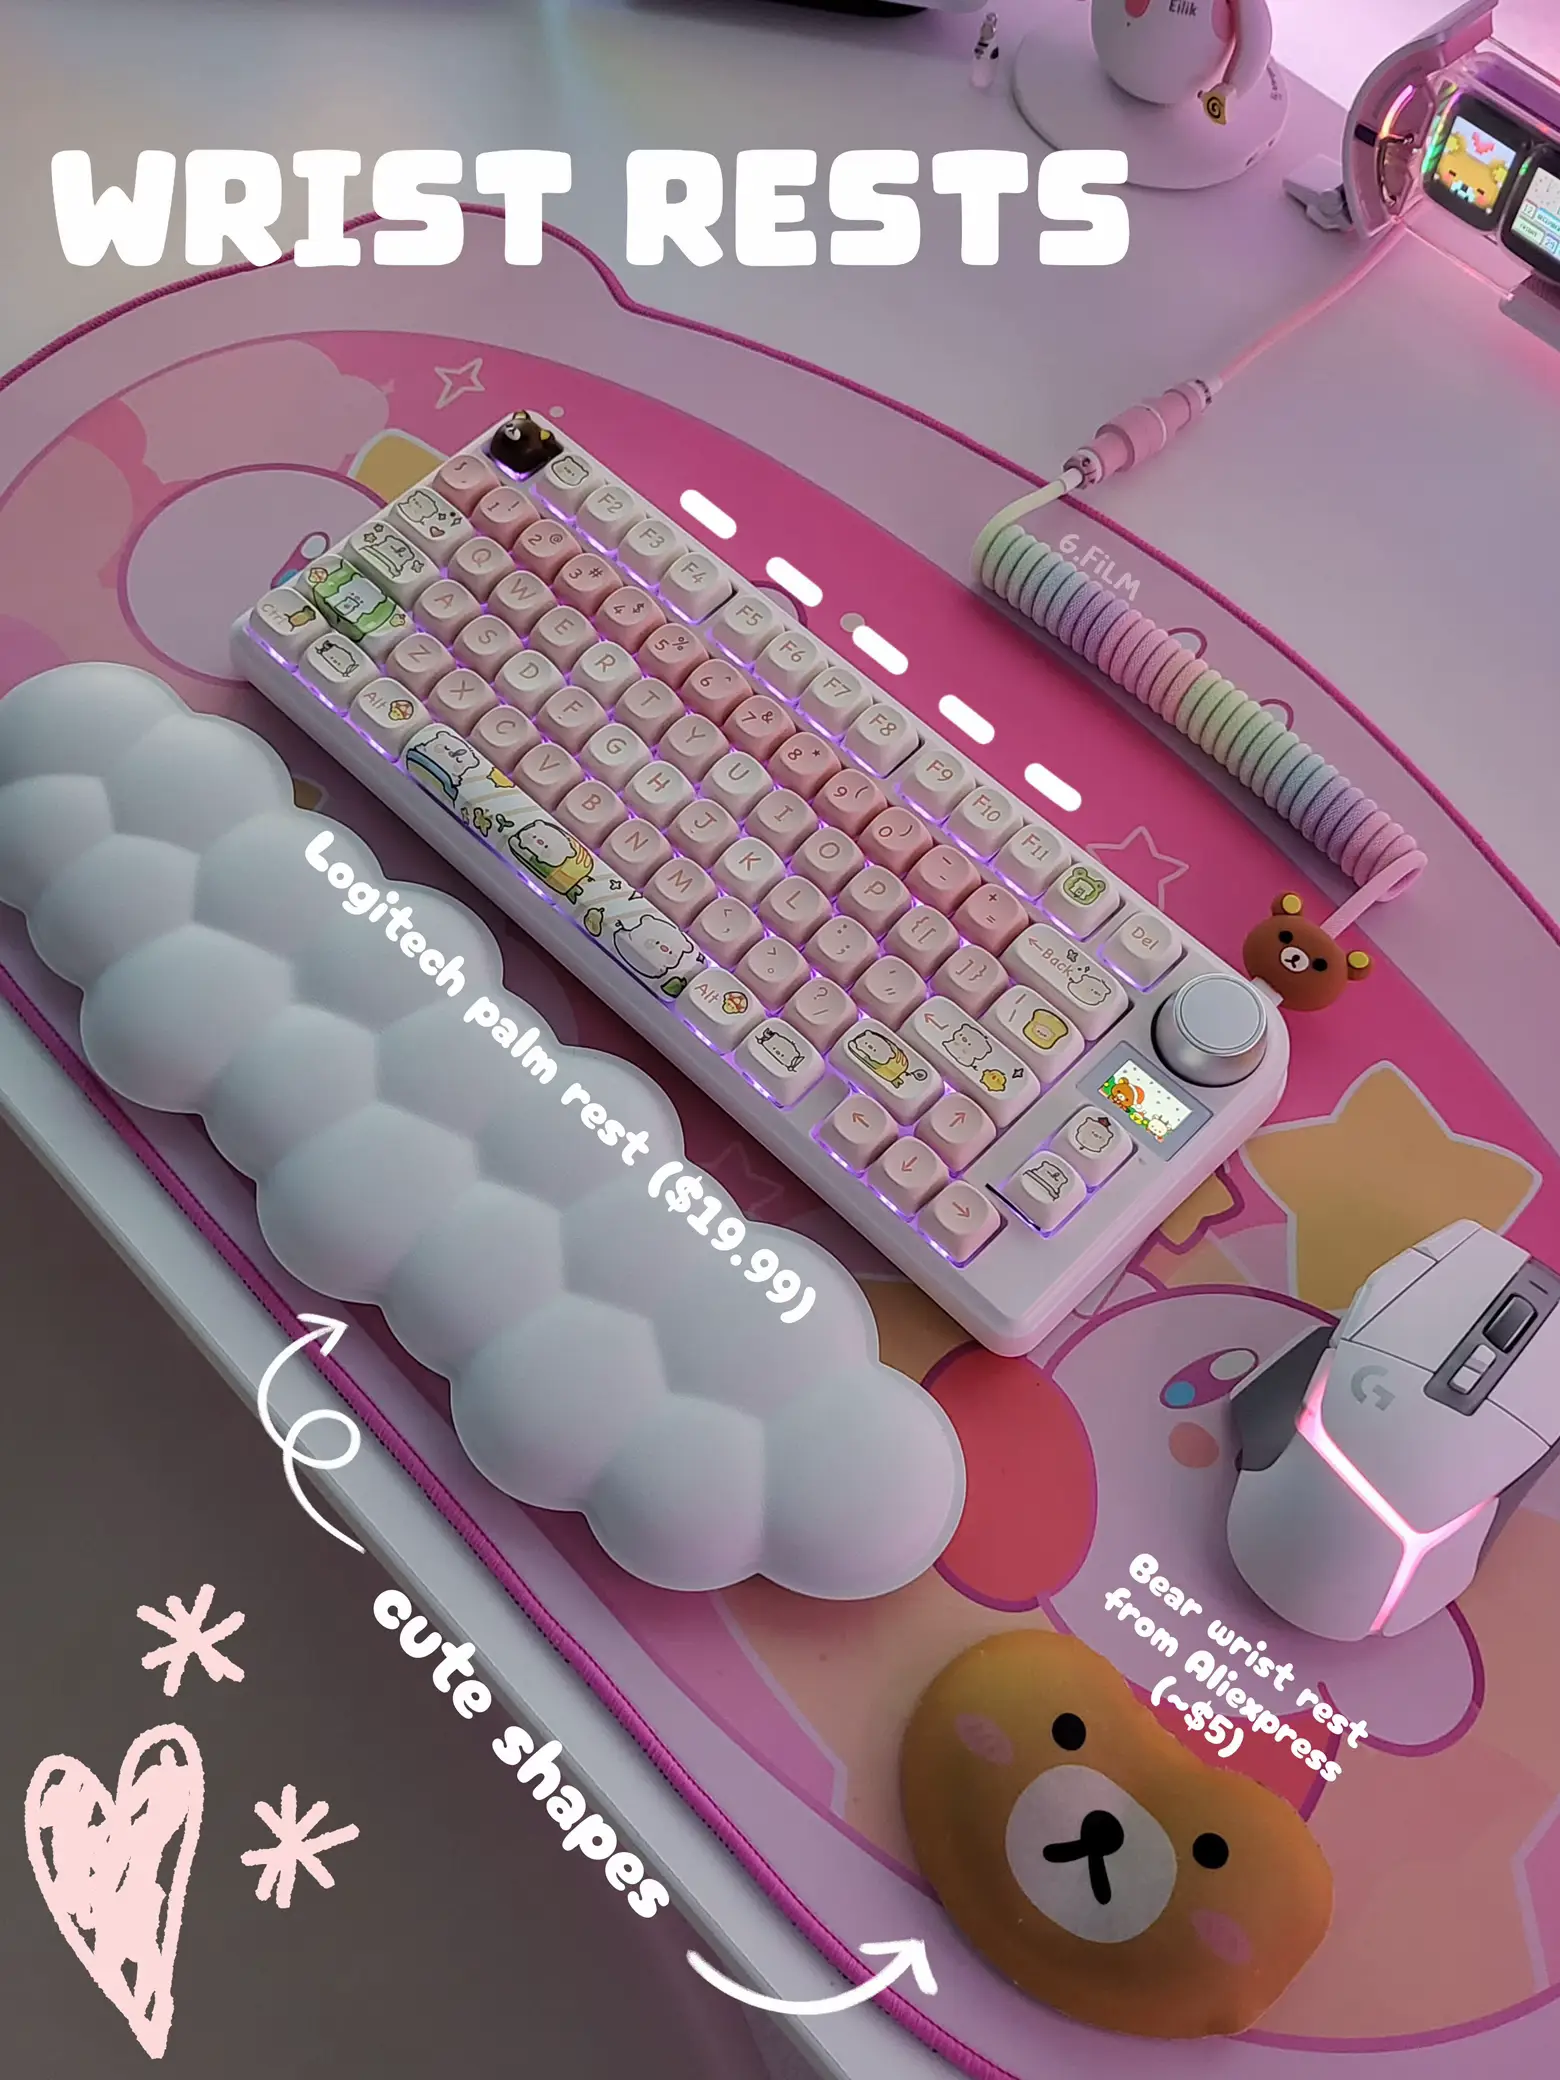 Hello Kitty x Logitech POP Mouse K380 Wireless Mouse My Melody Kuromi  Cinnamoroll with Bluetooth Inspired by You.